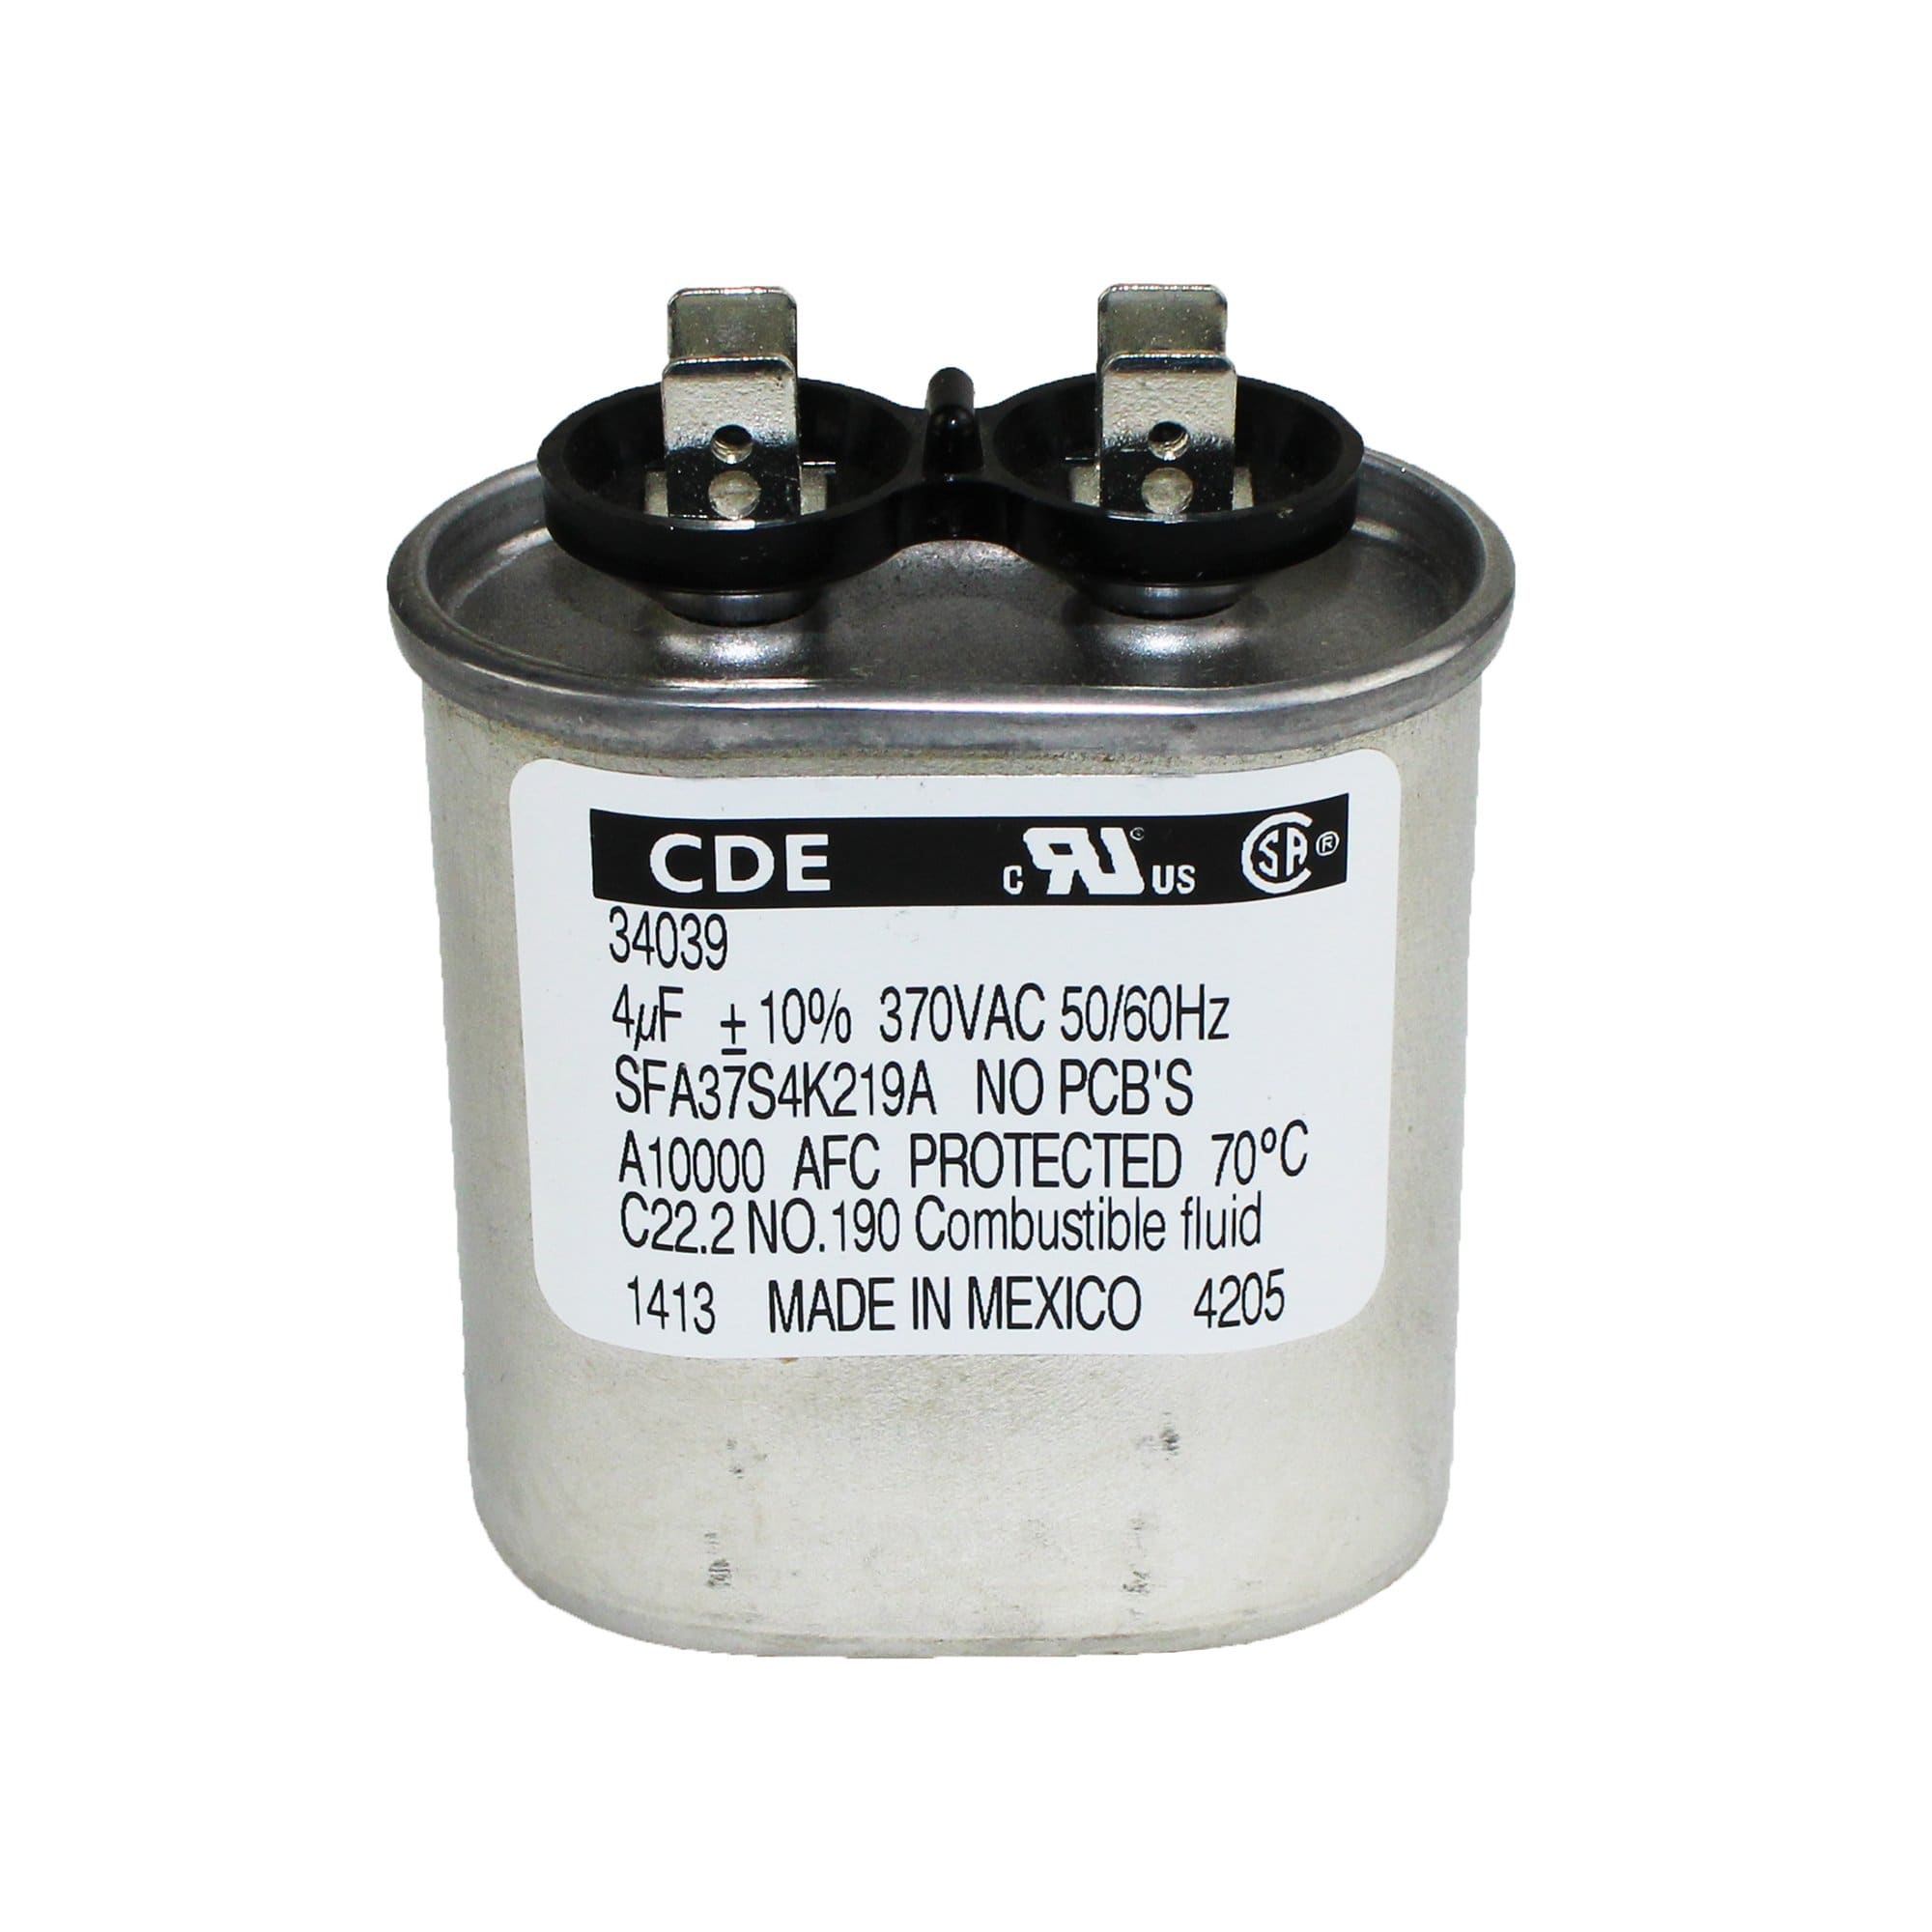 Atwood 34039 Hydro Flame Capacitor